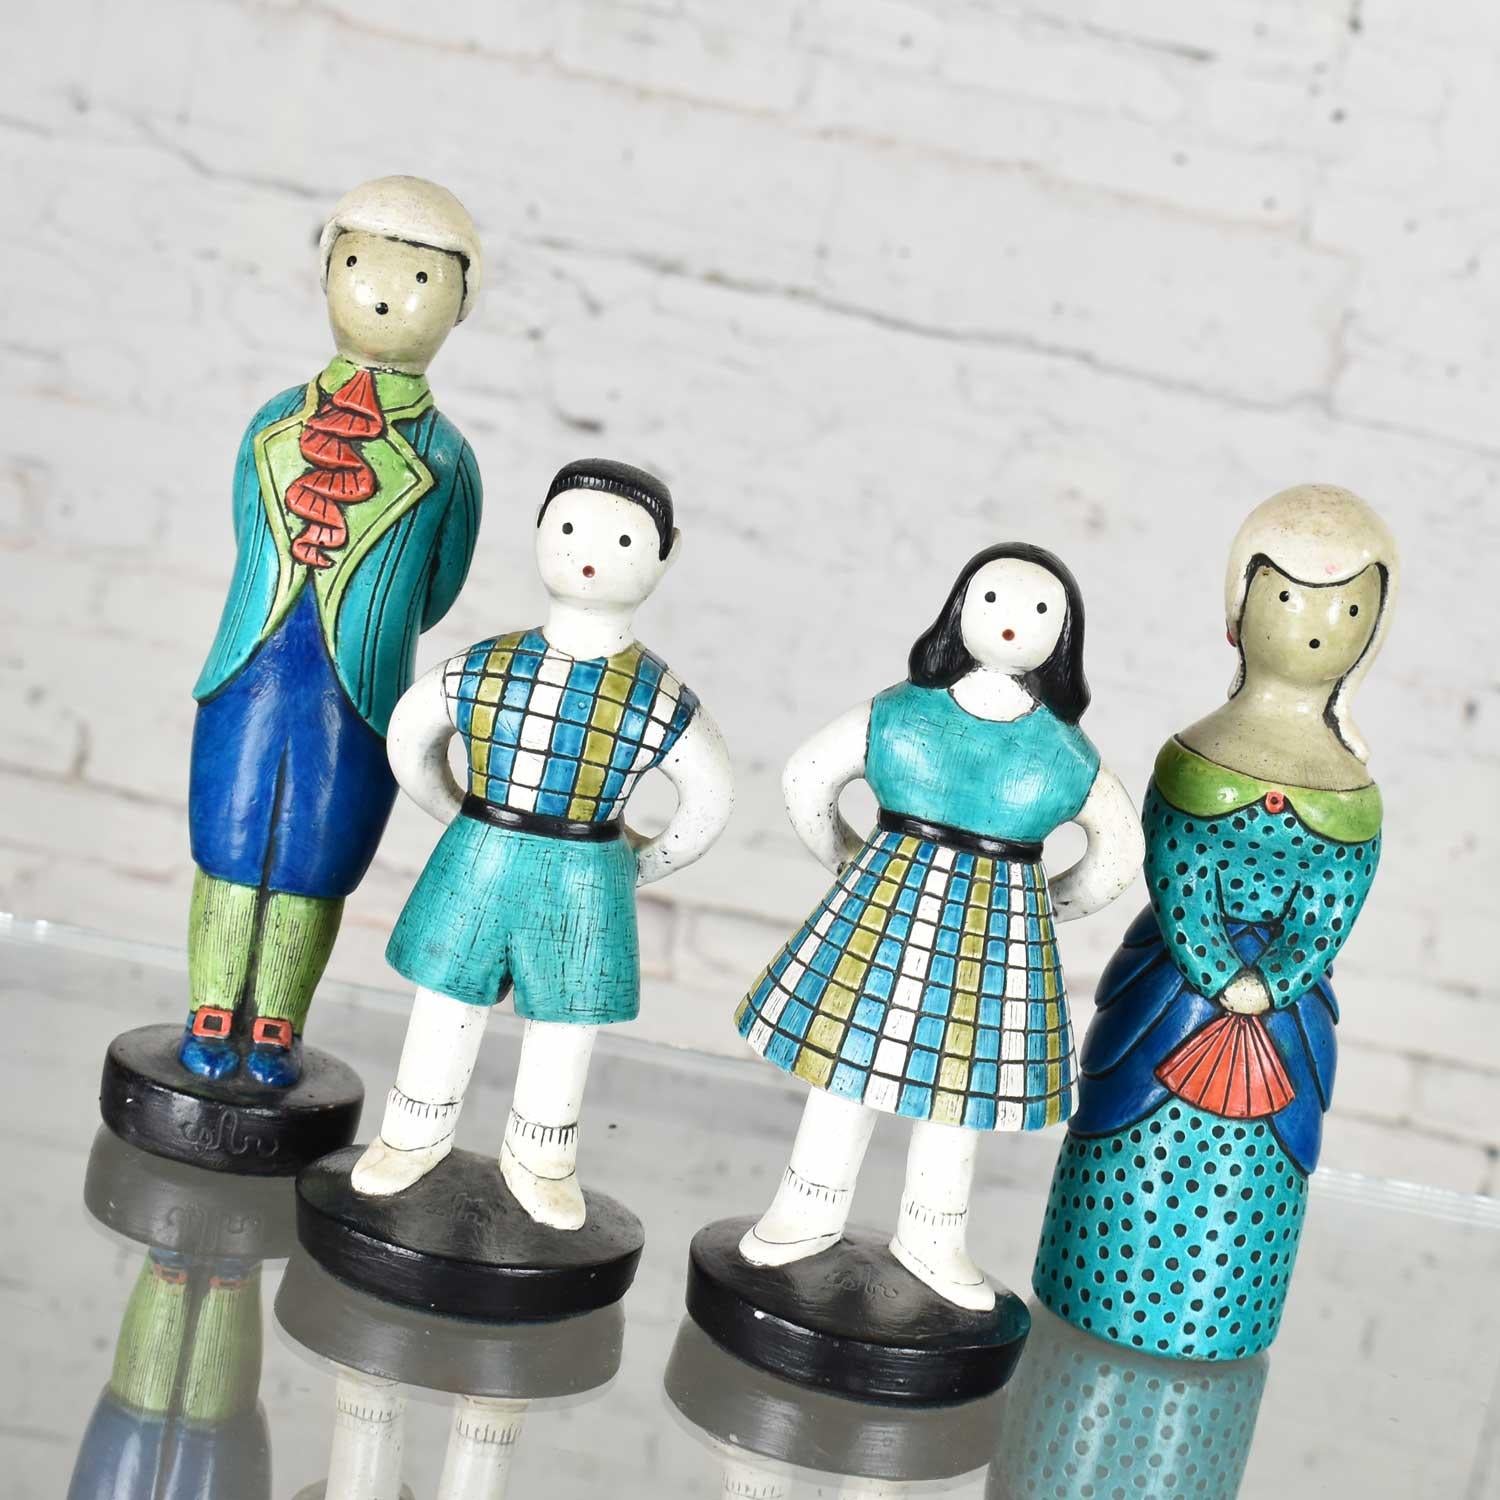 Sylvia hood original idyllic family set of four man, woman, and 2 children. These iconic figurines bear her logo indicating their rare authenticity. They are comprised of Extone (A material much like chalkware) elegantly painted with turquois, royal